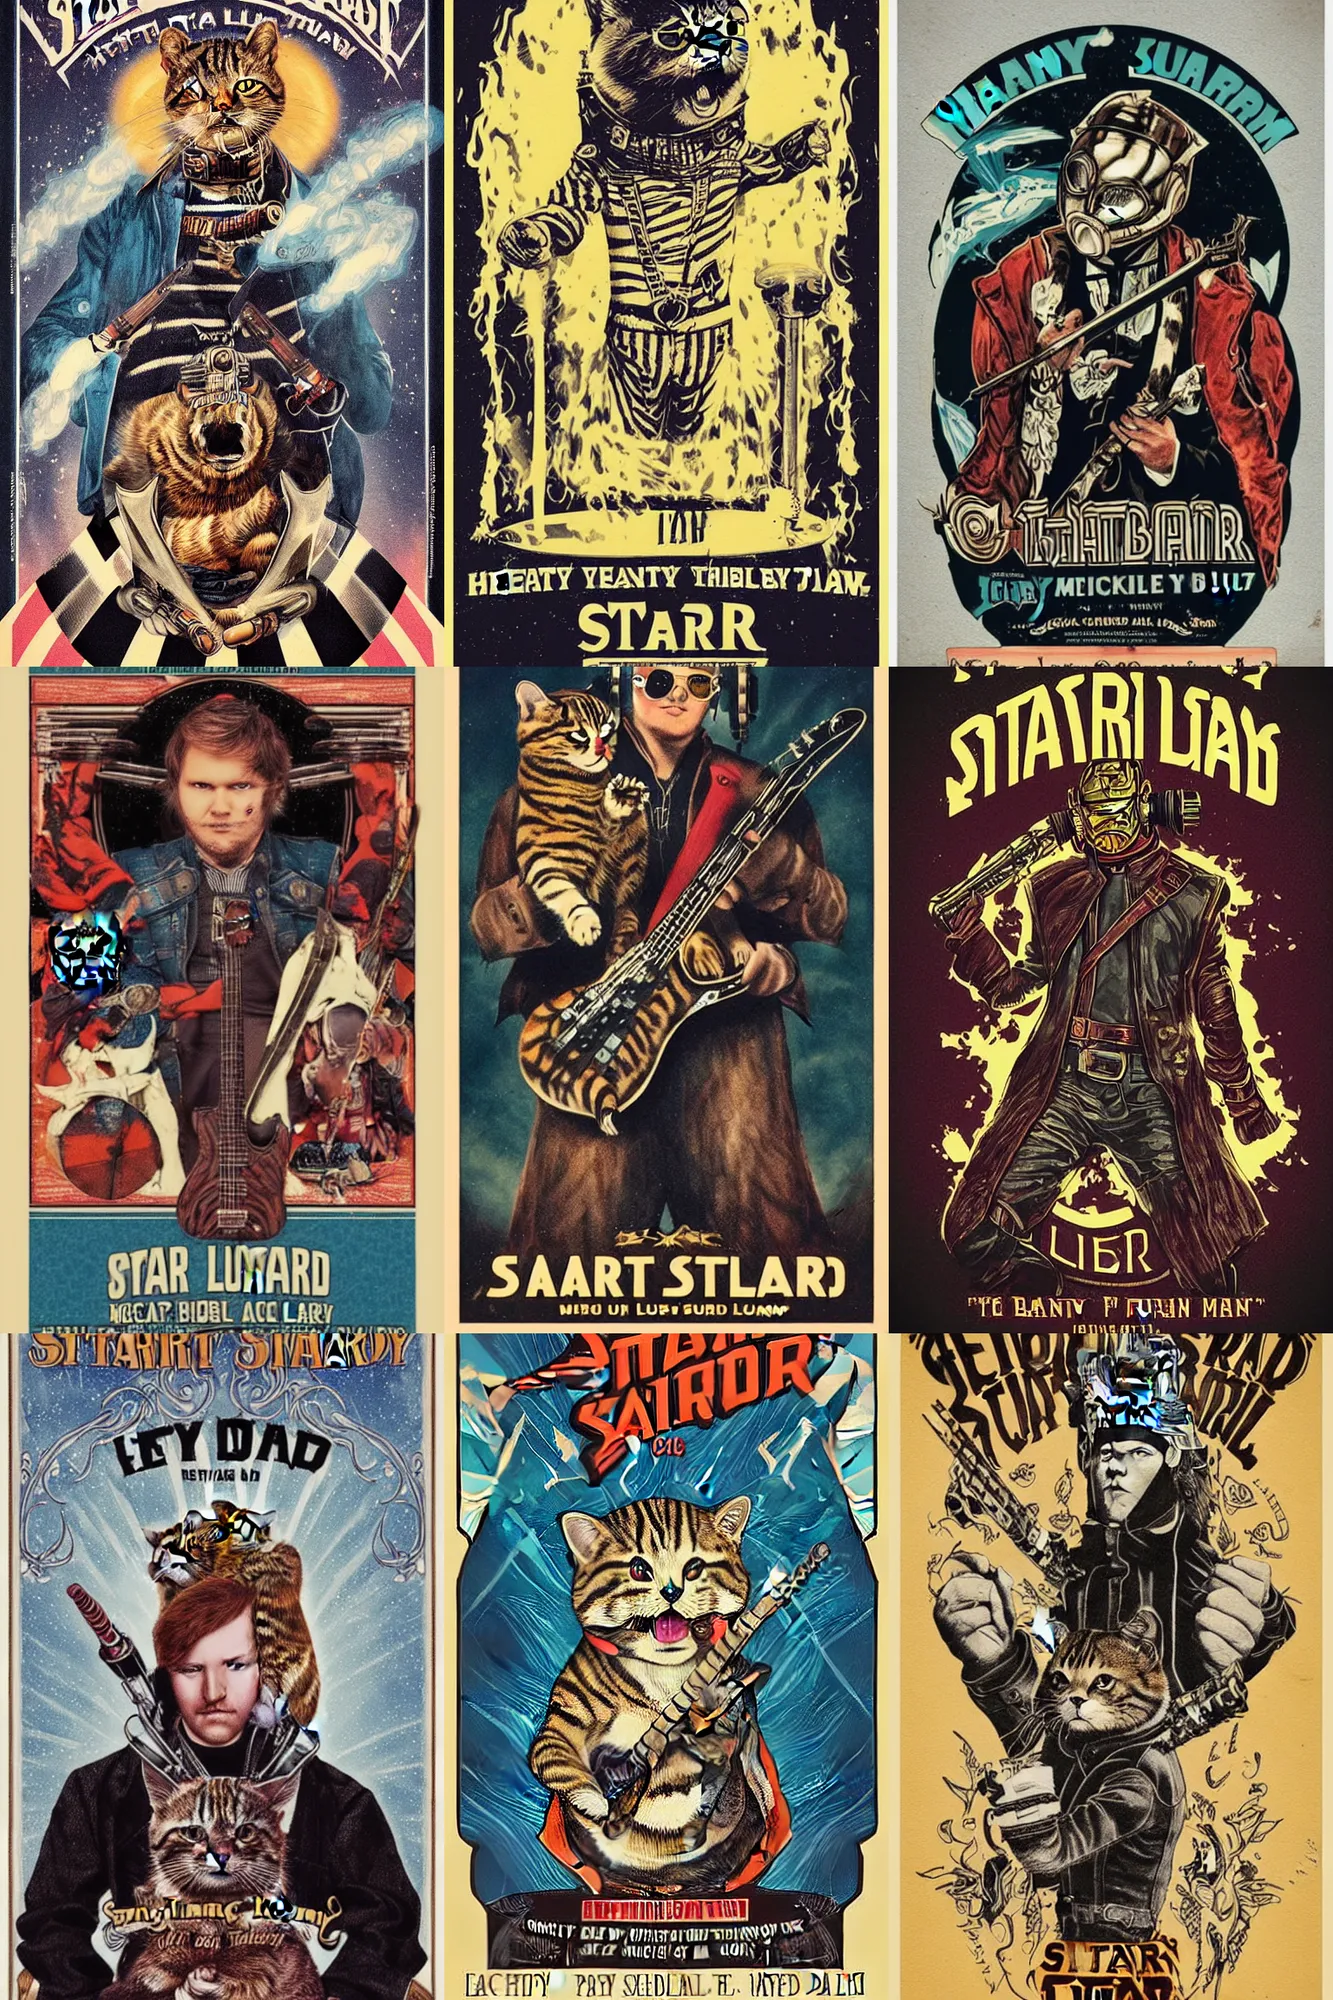 Prompt: Victorian concert poster for heavy metal band “star lord” featuring a striped tabby cat